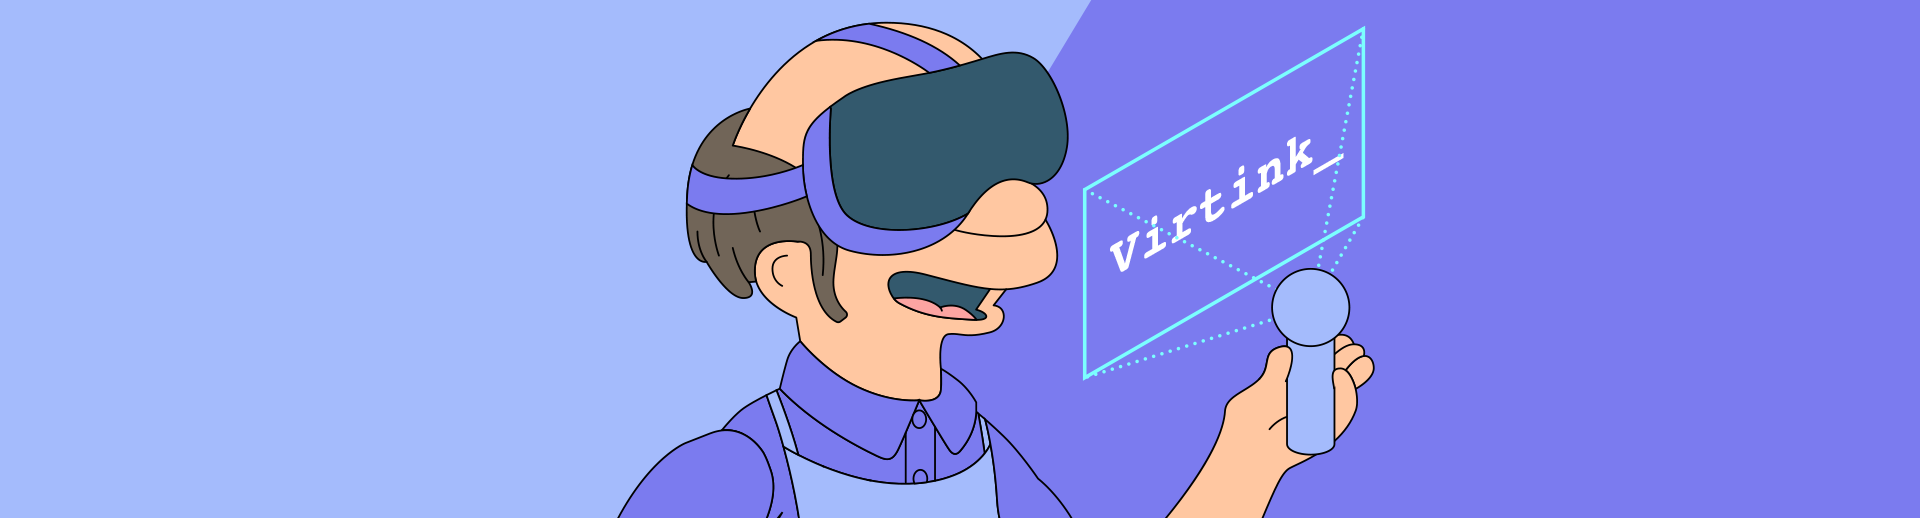 A man wearing a VR headset that projects the word 'Virtink' in front of him